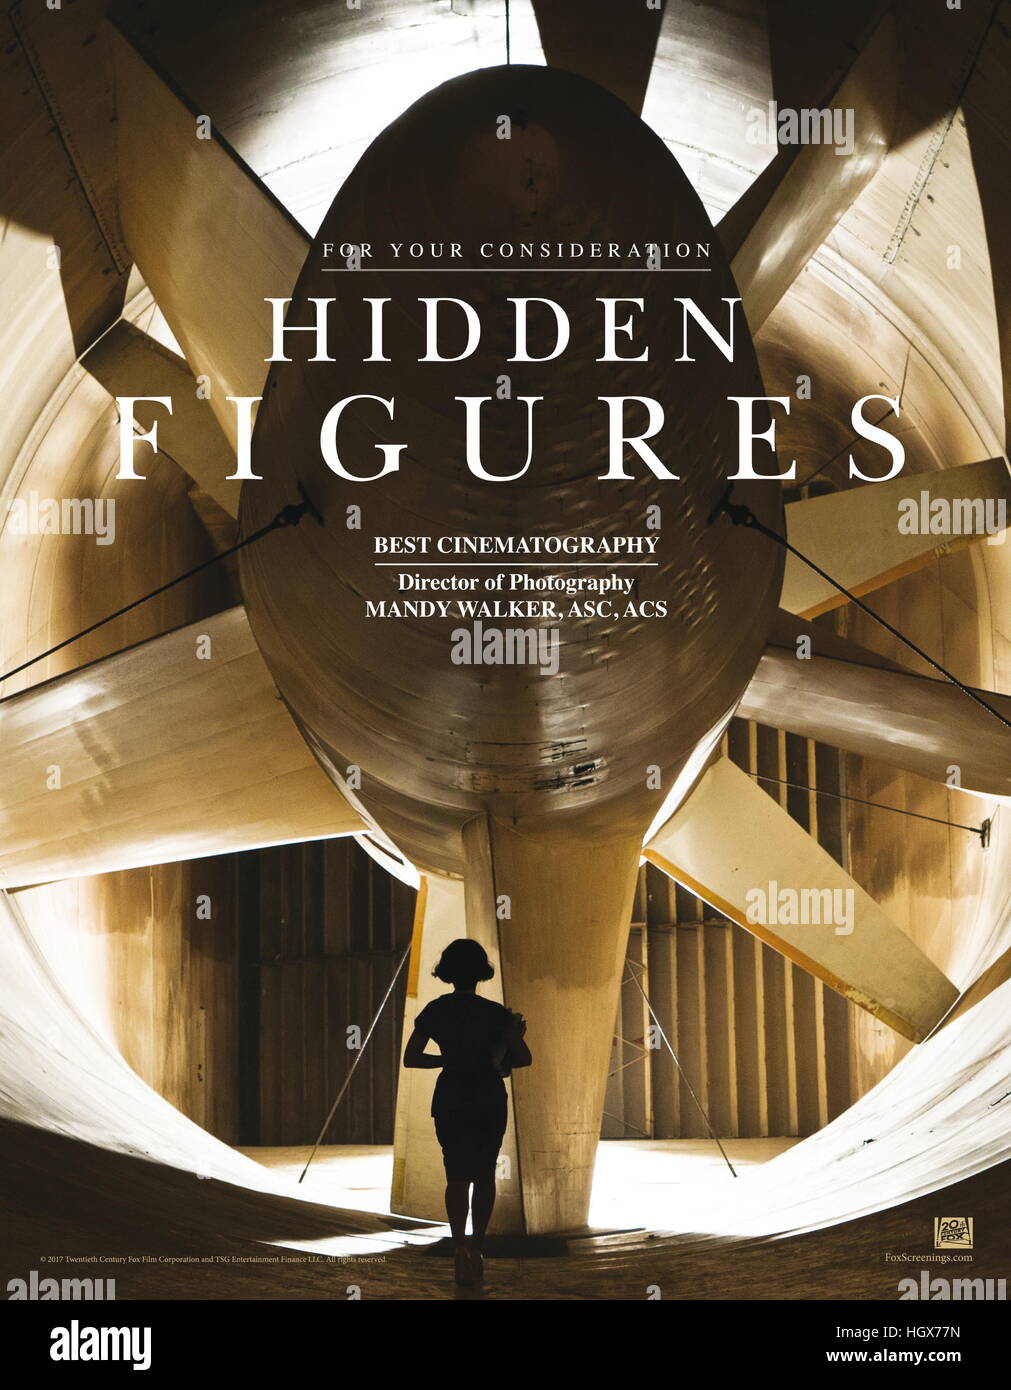 RELEASE DATE: January 6, 2017 TITLE: Hidden Figures STUDIO: Levantine Films  DIRECTOR: Theodore Melfi PLOT: Based on a true story. A team of  African-American women provide NASA with important mathematical data needed